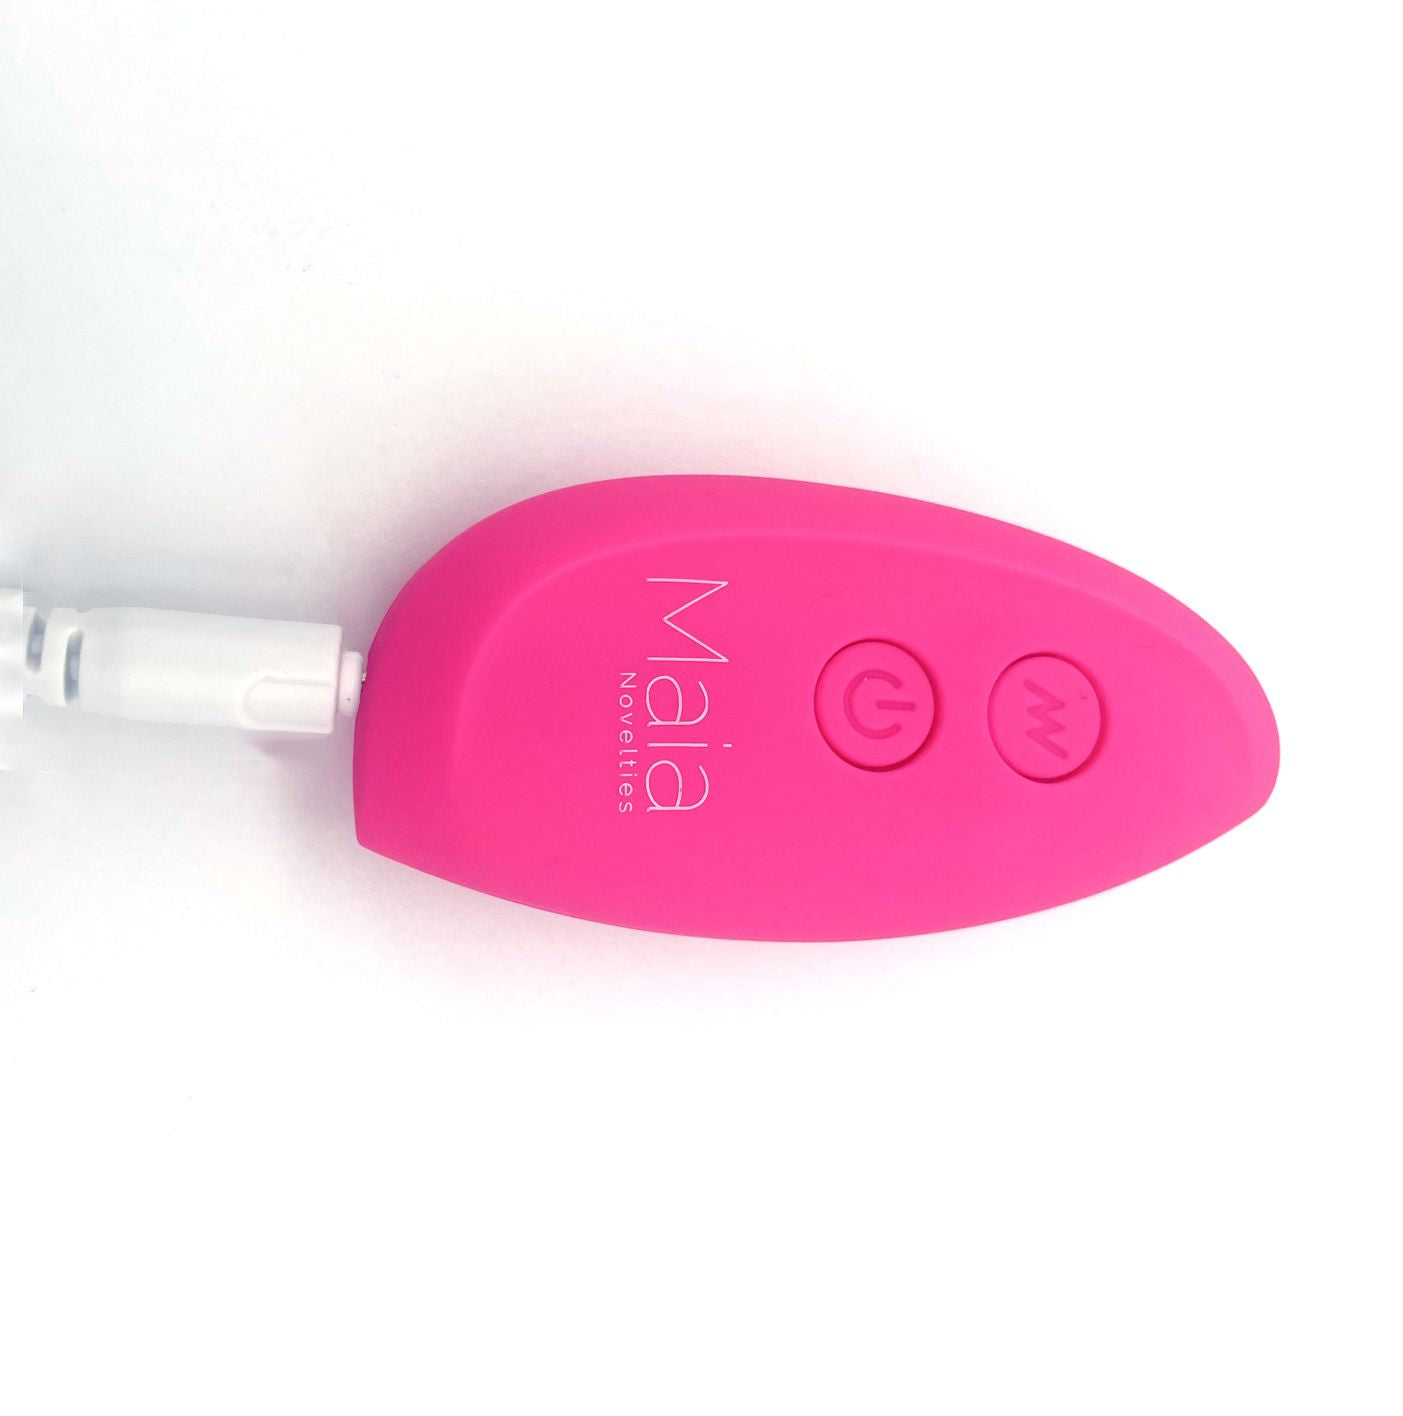 Rosie Rechargeable Egg Vibrator by Maia Toys